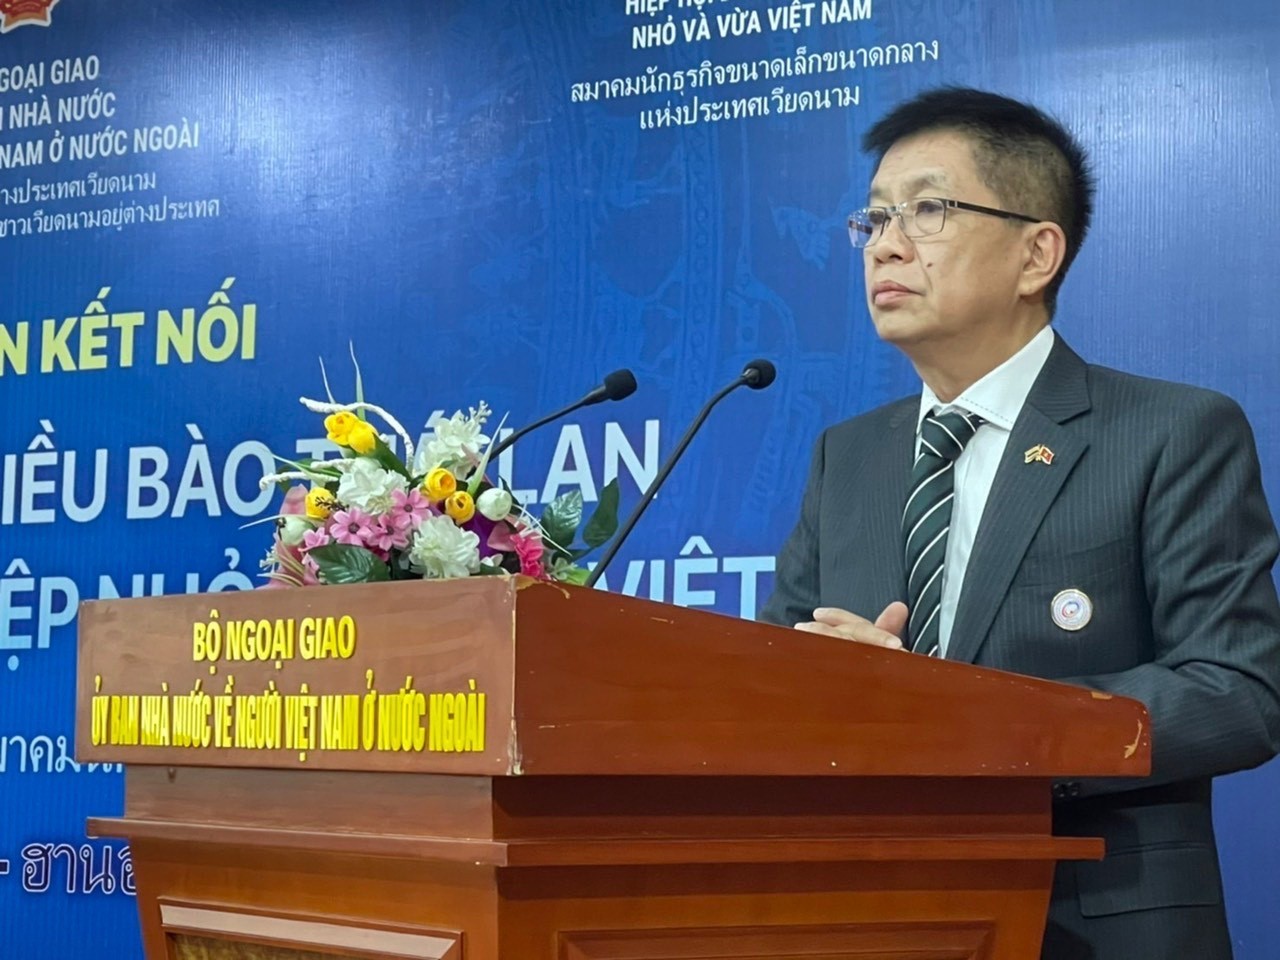 Mr. Ho Van Lam, Chairman of the Business Association of Thai-Vietnam (BAOTV) and owner of the VT Namnueng